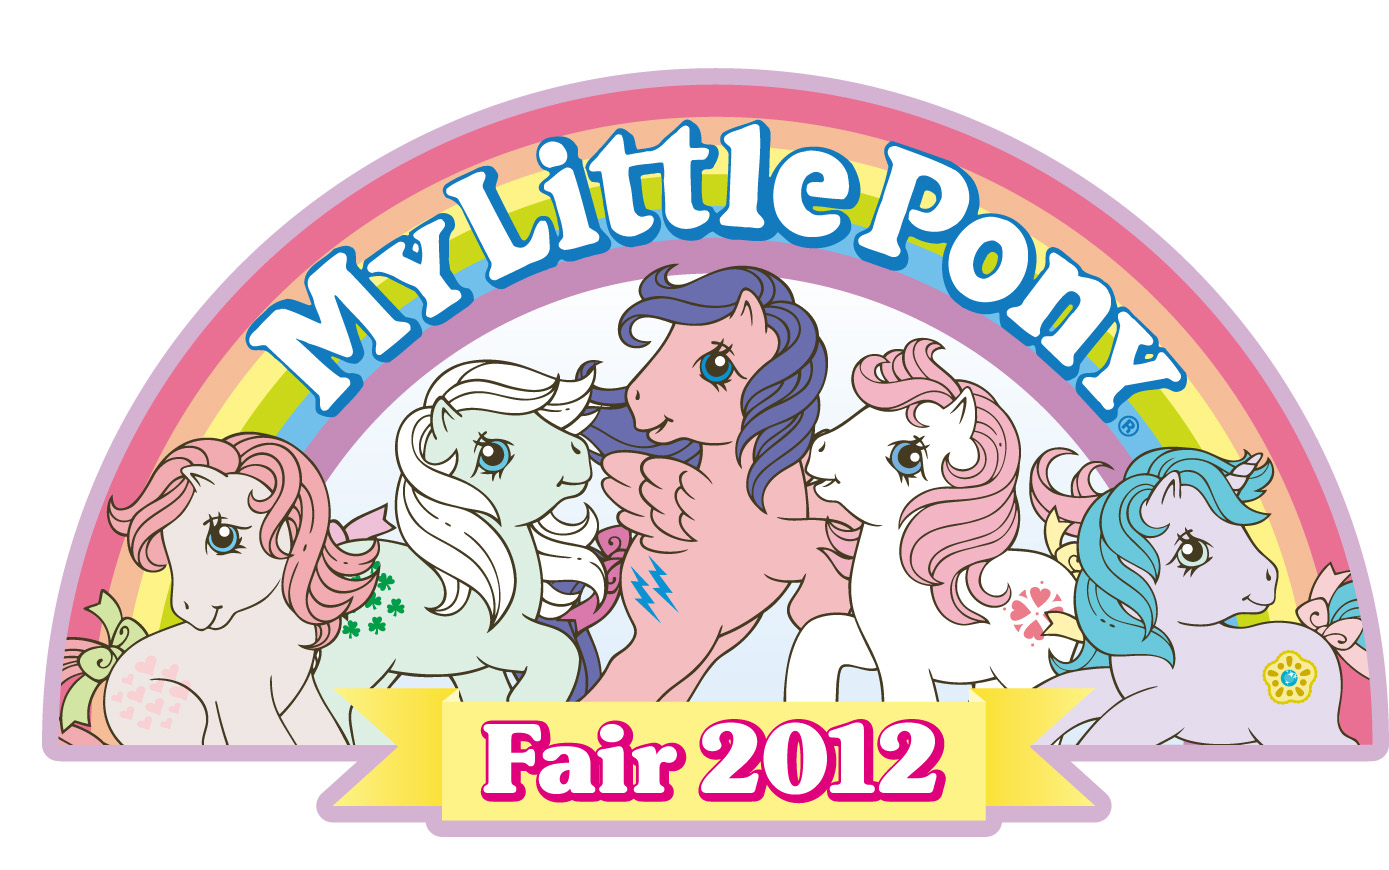 The logo for the 2012 My Little Pony Fair recalls vintage '80s advertising.